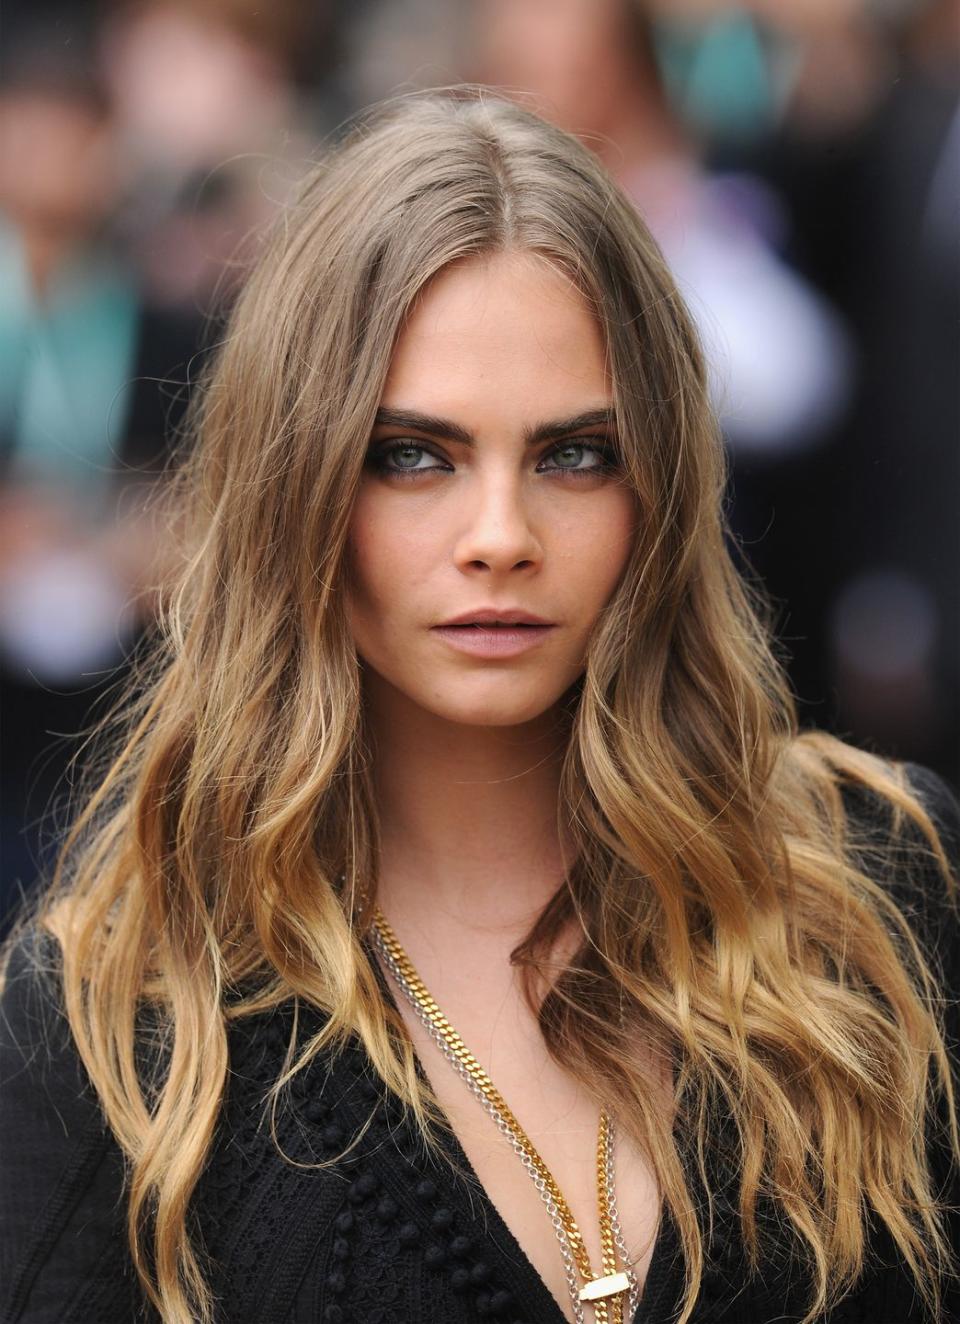 Cara Delevingne as Margo in 'Paper Towns'